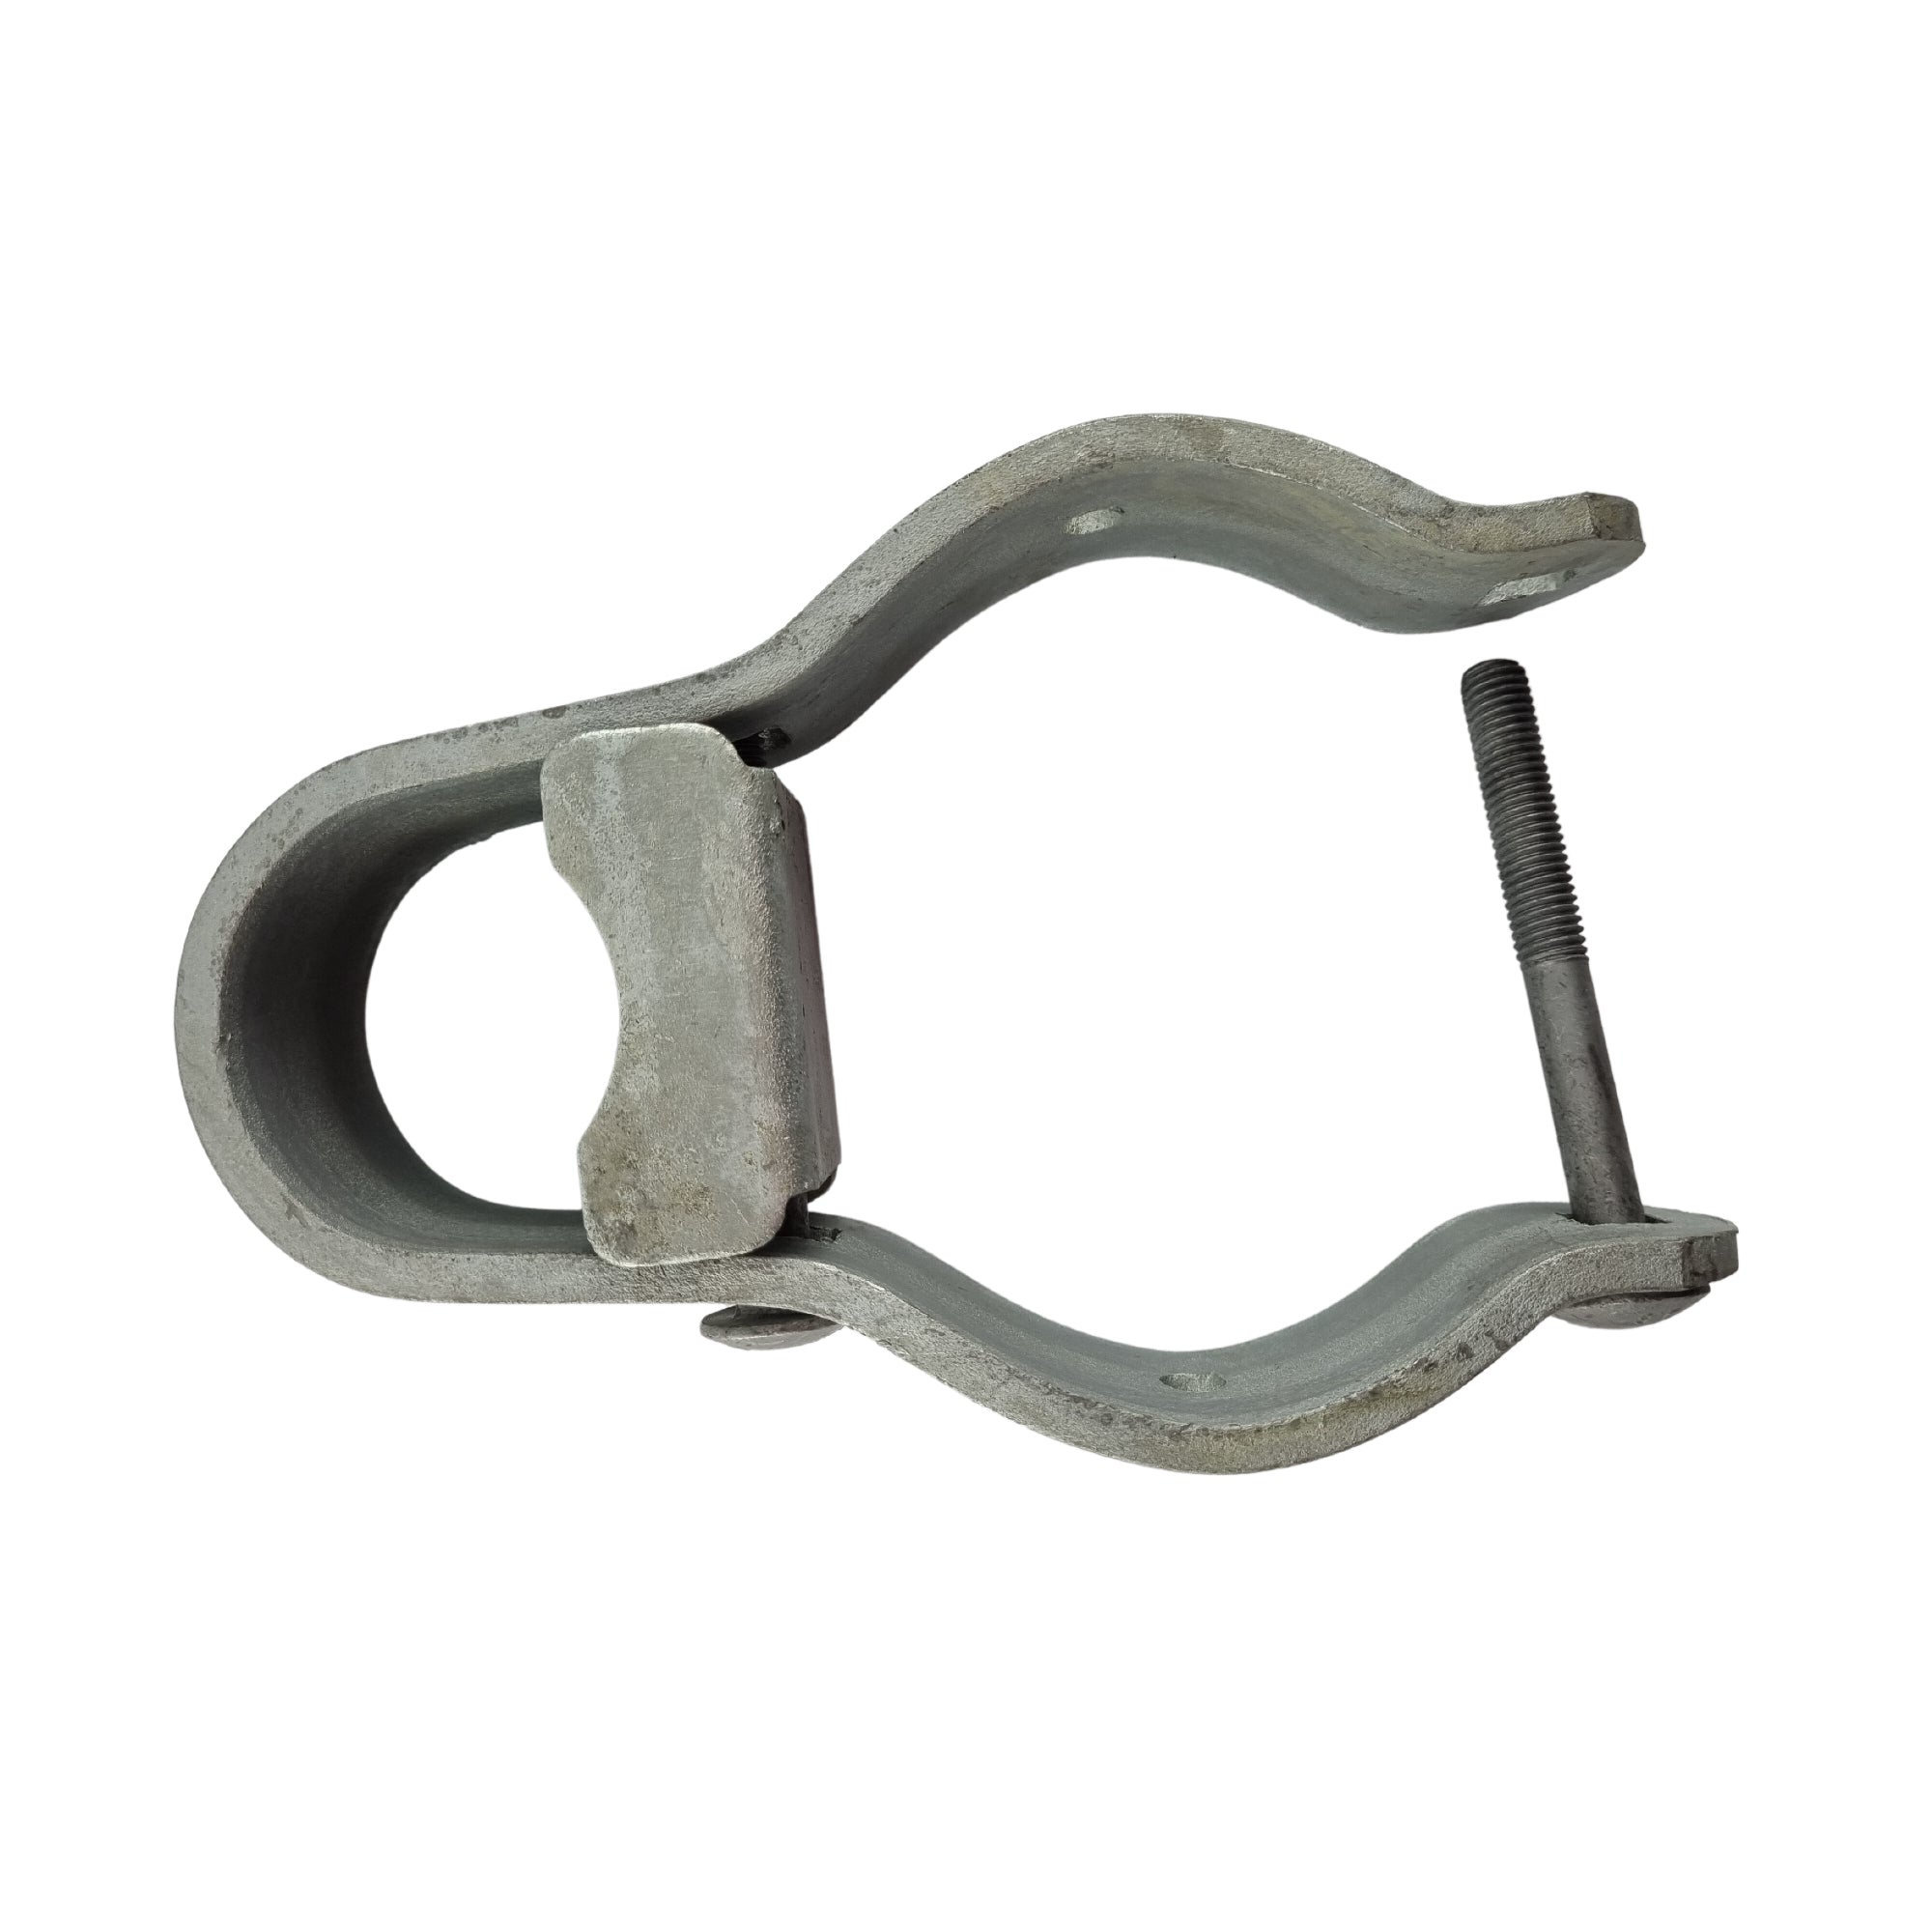 Strap Type Hinge + Attachment - Galvanised. Various sizes. Shop fence and gate fittings online chain.com.au. Australia wide shipping